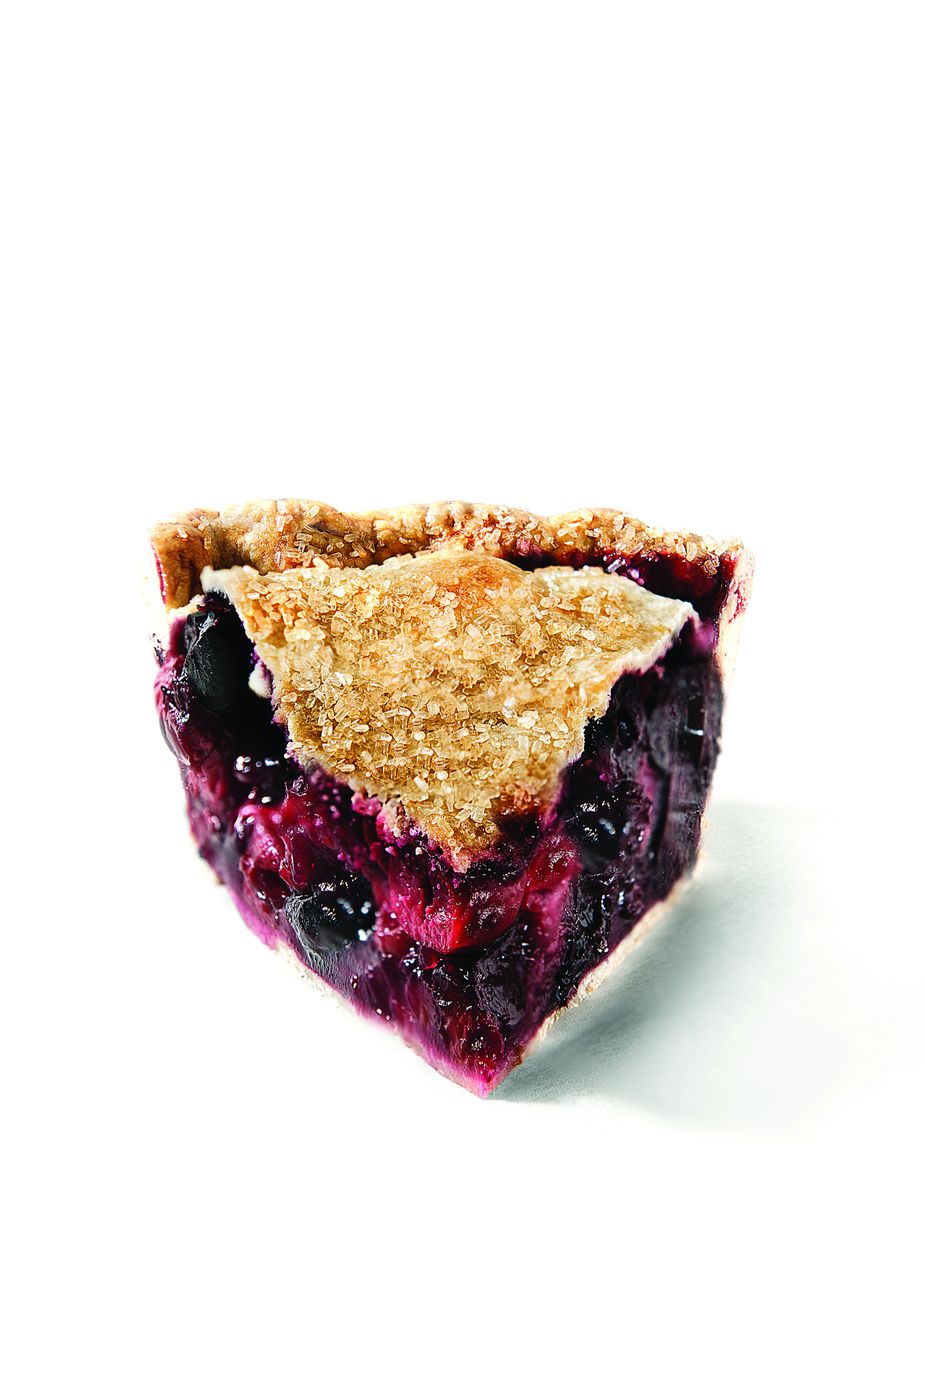 In March 2015, USA Today named Pie Junkie in Oklahoma City one of the top ten places to go for pie in the United States. Tart Cherry, above, is one of the shop’s regular flavors.